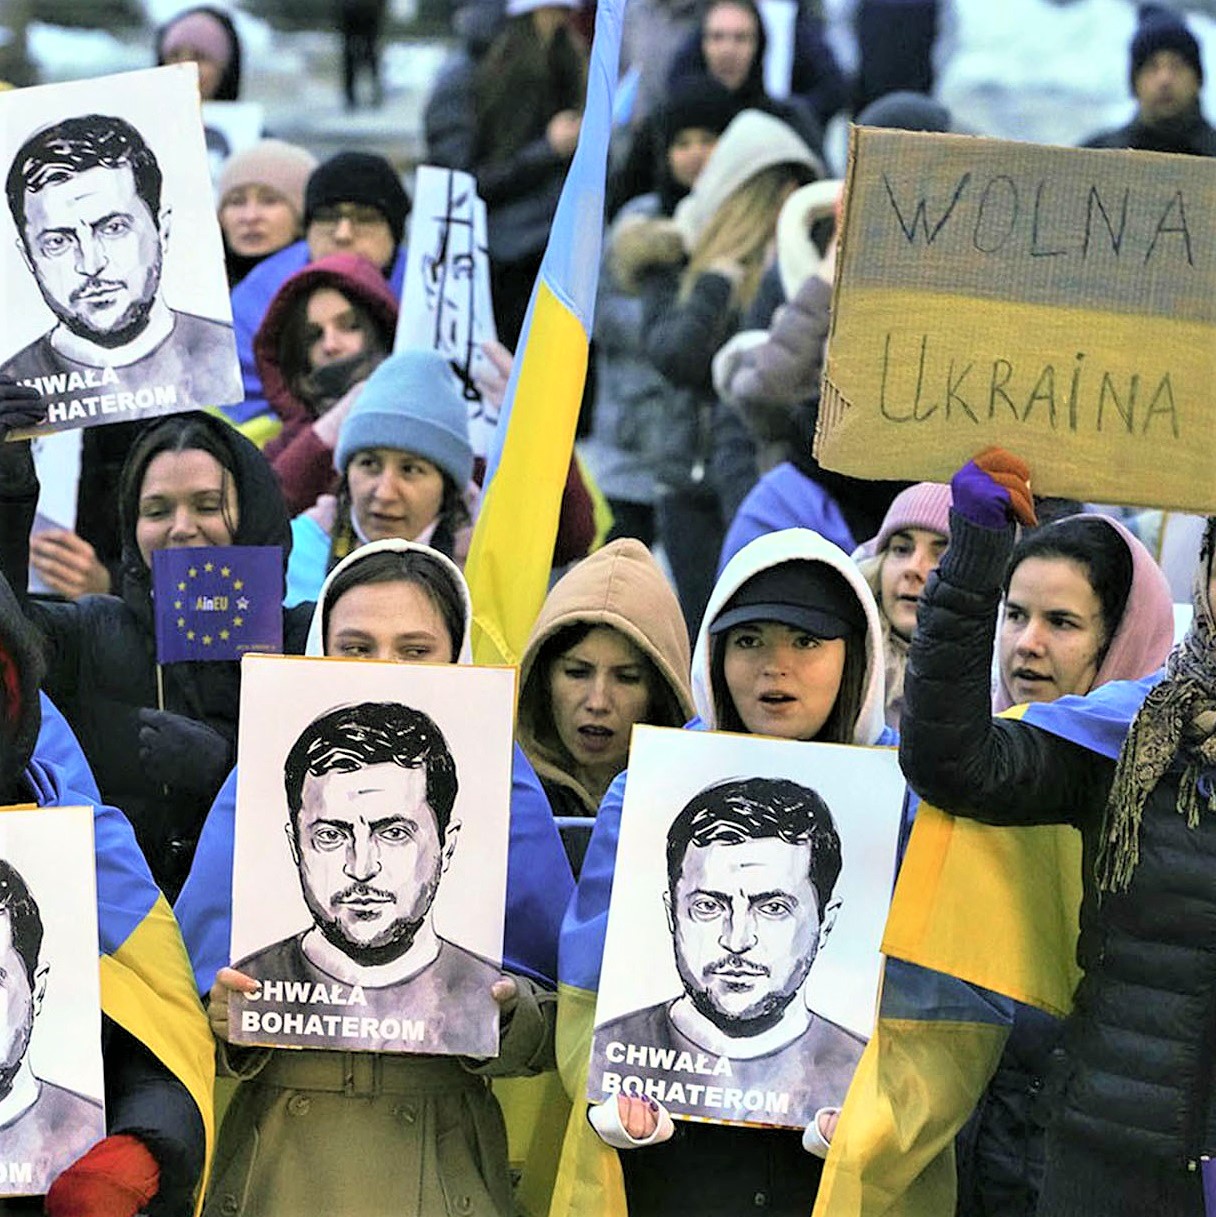 People hold portraits of Ukrainian President Volodymyr Zelenskyy during an anti-war rally in front of the Palace of Culture and Science in Warsaw, Poland, Saturday, April 2022. Image: AP Photo / Czarek Sokolowski